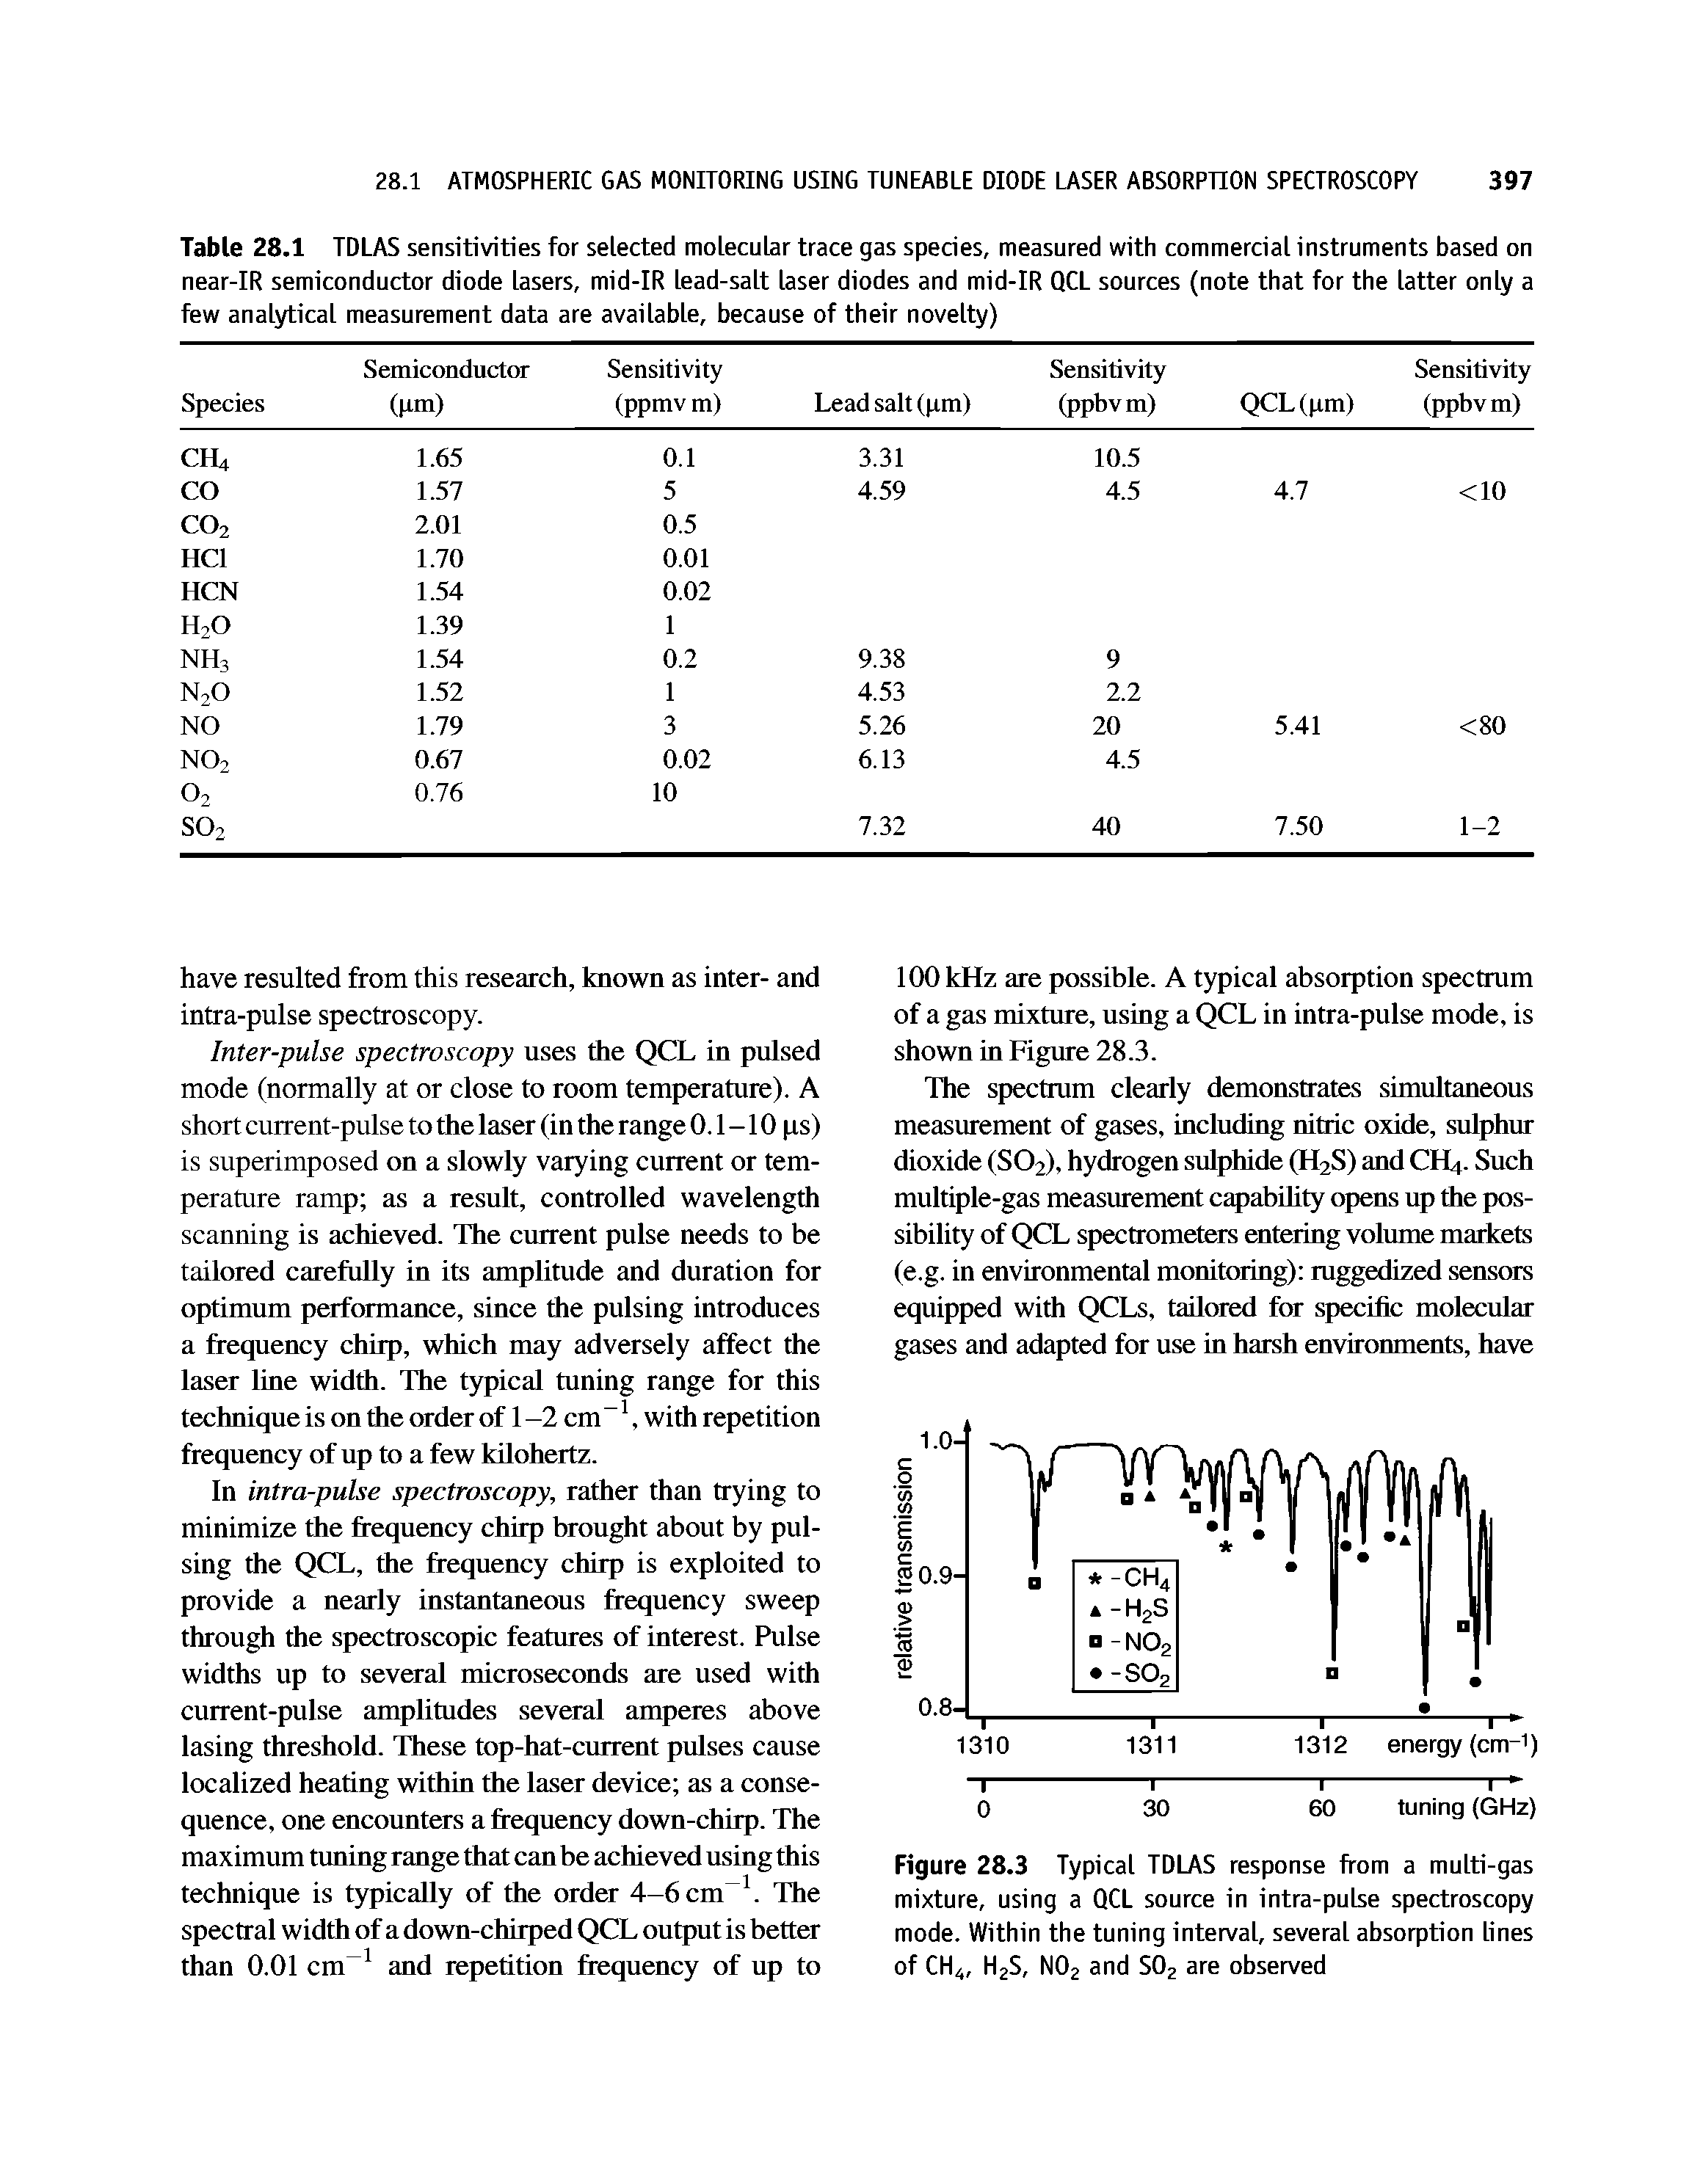 Table 28.1 TDLAS sensitivities for selected molecular trace gas species, measured with commercial instruments based on near-IR semiconductor diode lasers, mid-IR lead-salt laser diodes and mid-IR QCL sources (note that for the latter only a few analytical measurement data are available, because of their novelty)...